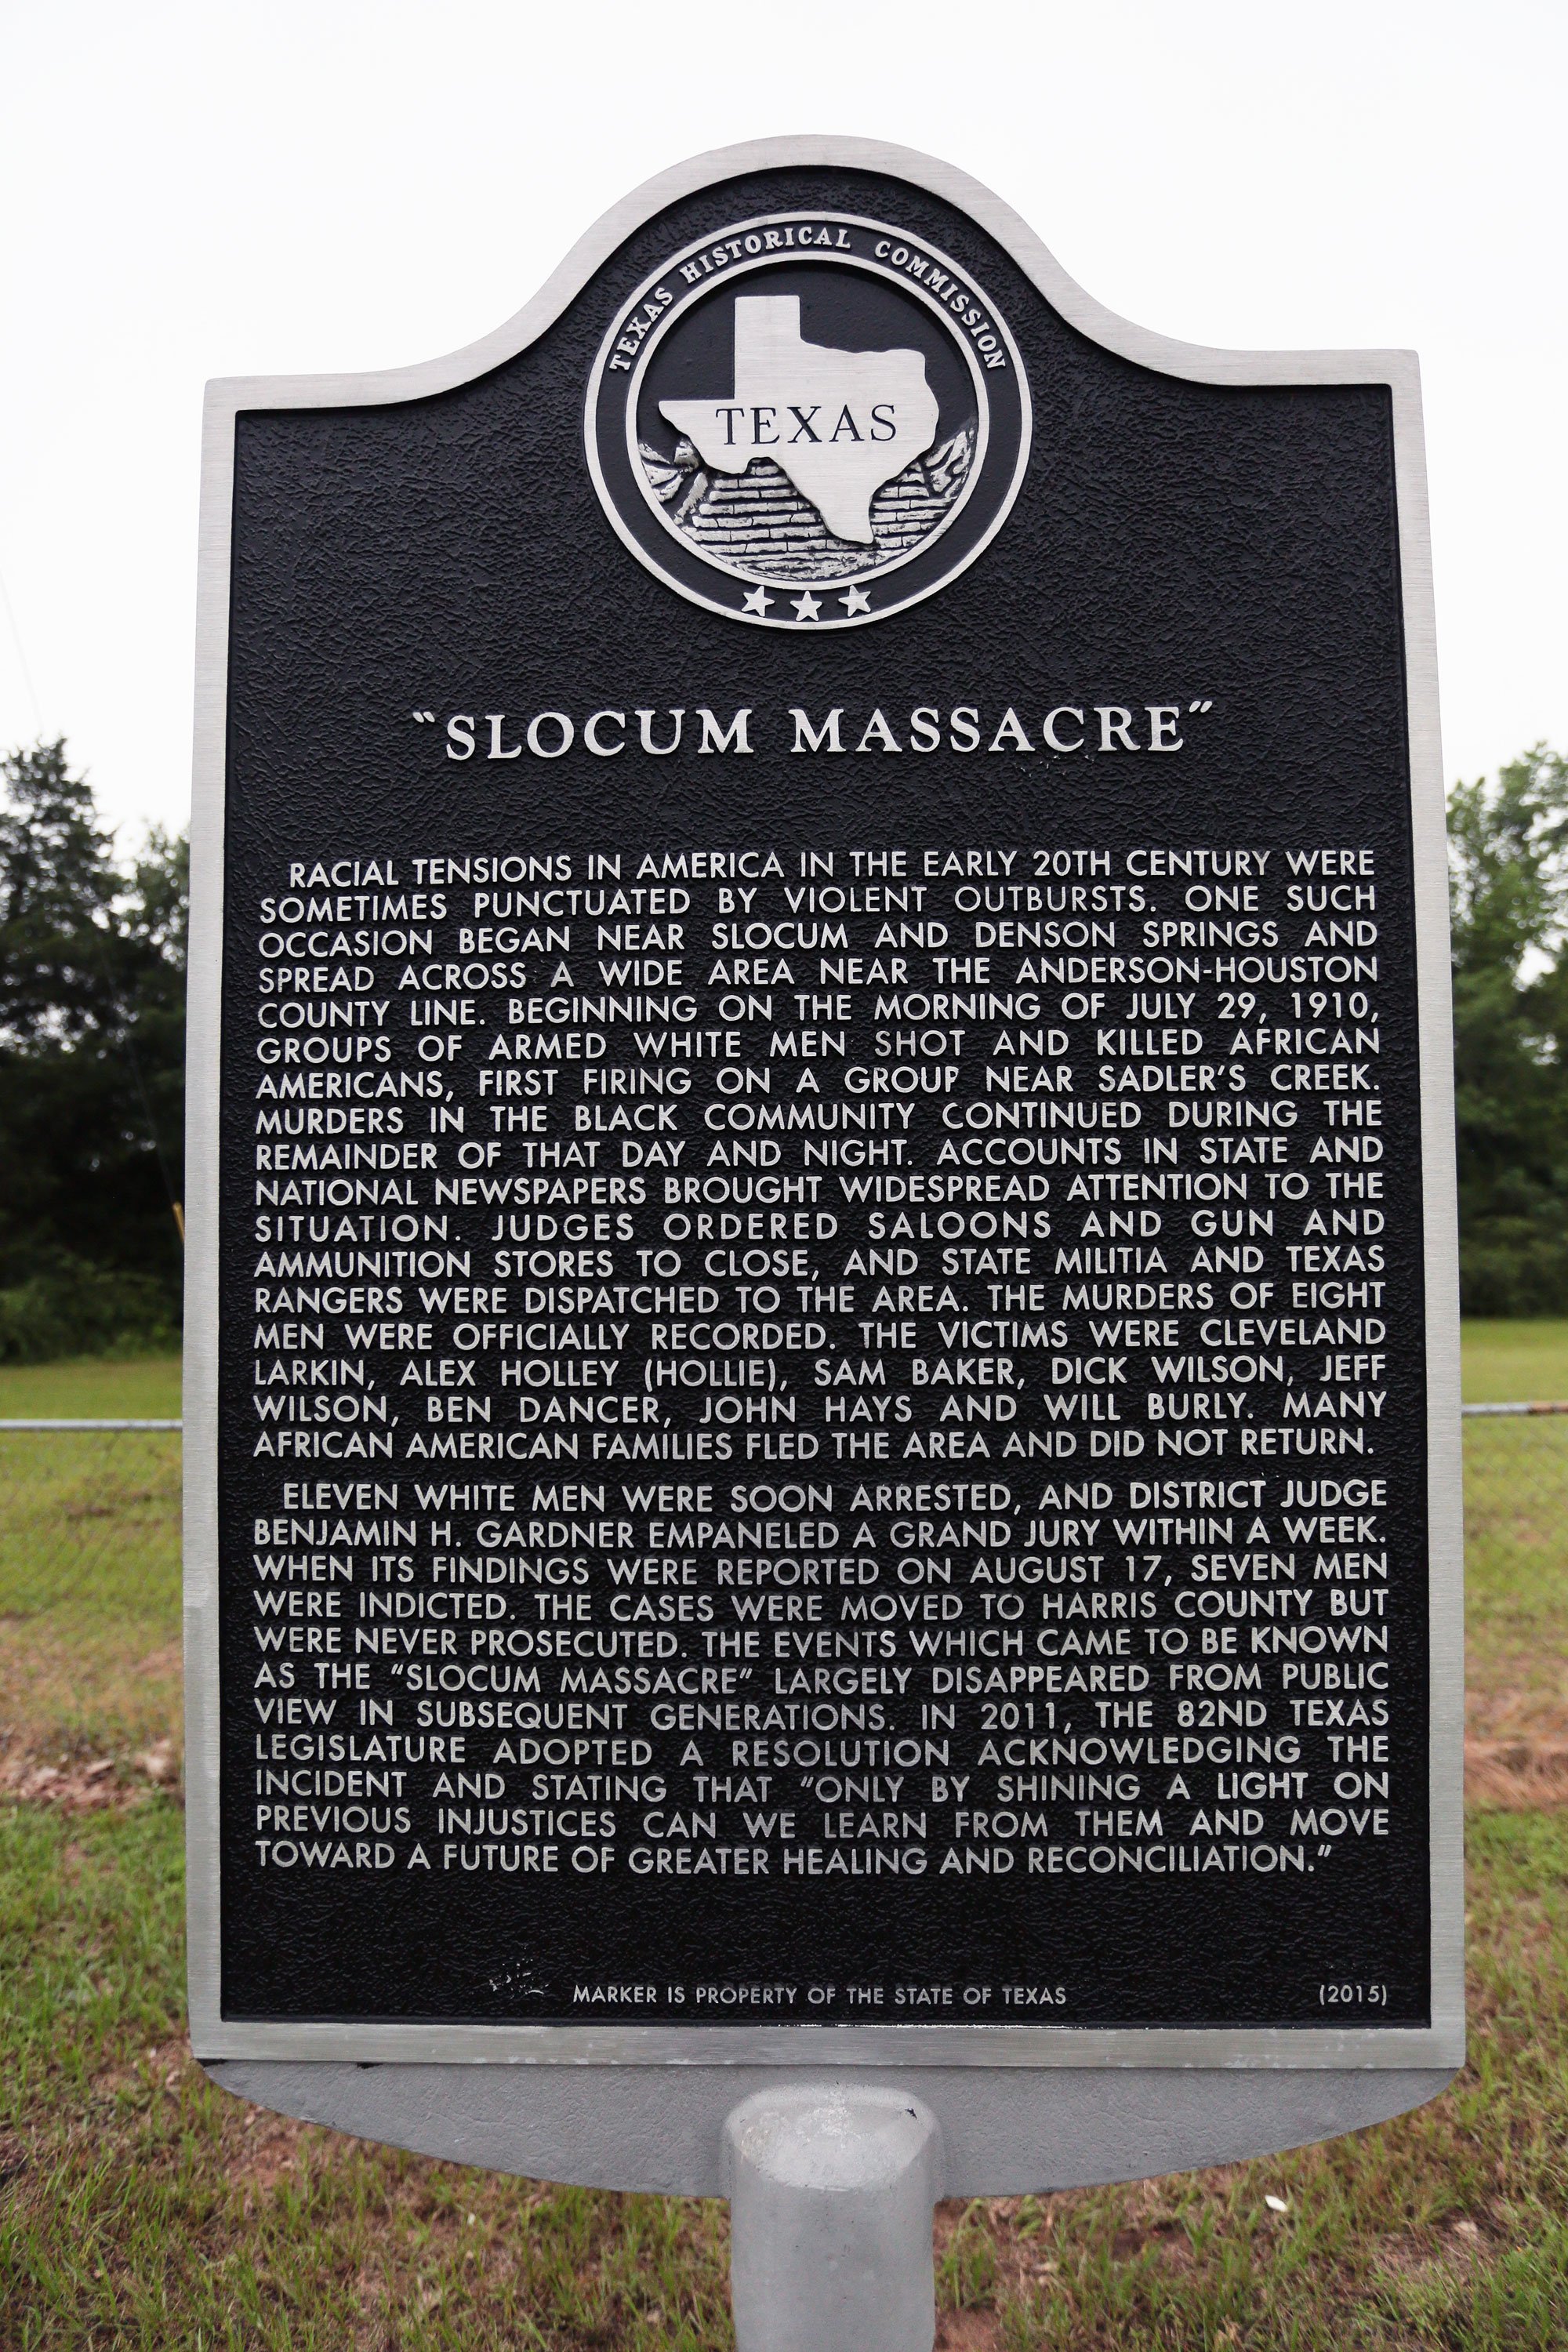 The marker reads: “Racial tensions in America in the early 20th century were sometimes punctuated by violent outbursts. One such occasion began near Slocum and Denson Springs and spread across a wide area near the Anderson-Houston county line. Beginning on the morning of July 29, 1910, groups of armed white men shot and killed African Americans, first firing on a group near Sadler's Creek. Murders in the black community continued during the remainder of that day and night. Accounts in state and national newspapers brought widespread attention to the situation. Judges ordered saloons and gun ammunitions to close, and state militia and Texas Rangers were dispatched to the area. The murders of eight men were officially recorded. The victims were Cleveland Larkin, Alex Holley (Hollie), Sam Baker, Dick Wilson, Jeff Wilson, Ben Dancer, John Hays and Will Burly. Many African American families fled the area and did not return. Eleven white men were soon arrested, and District Judge Benjamin H. Gardner empaneled a grand jury within a week. When its findings were reported on August 17, seven men were indicted. The cases were moved to Harris County but were never prosecuted. The events which came to be known as the ‘Slocum Massacre’ largely disappeared from public view in subsequent generations. In 2011, the 82nd Texas Legislature adopted a resolution acknowledging the incident and stating that ‘only by shining a light on the previous injustices can we learn from them and move toward a future of greater healing and reconciliation.’”